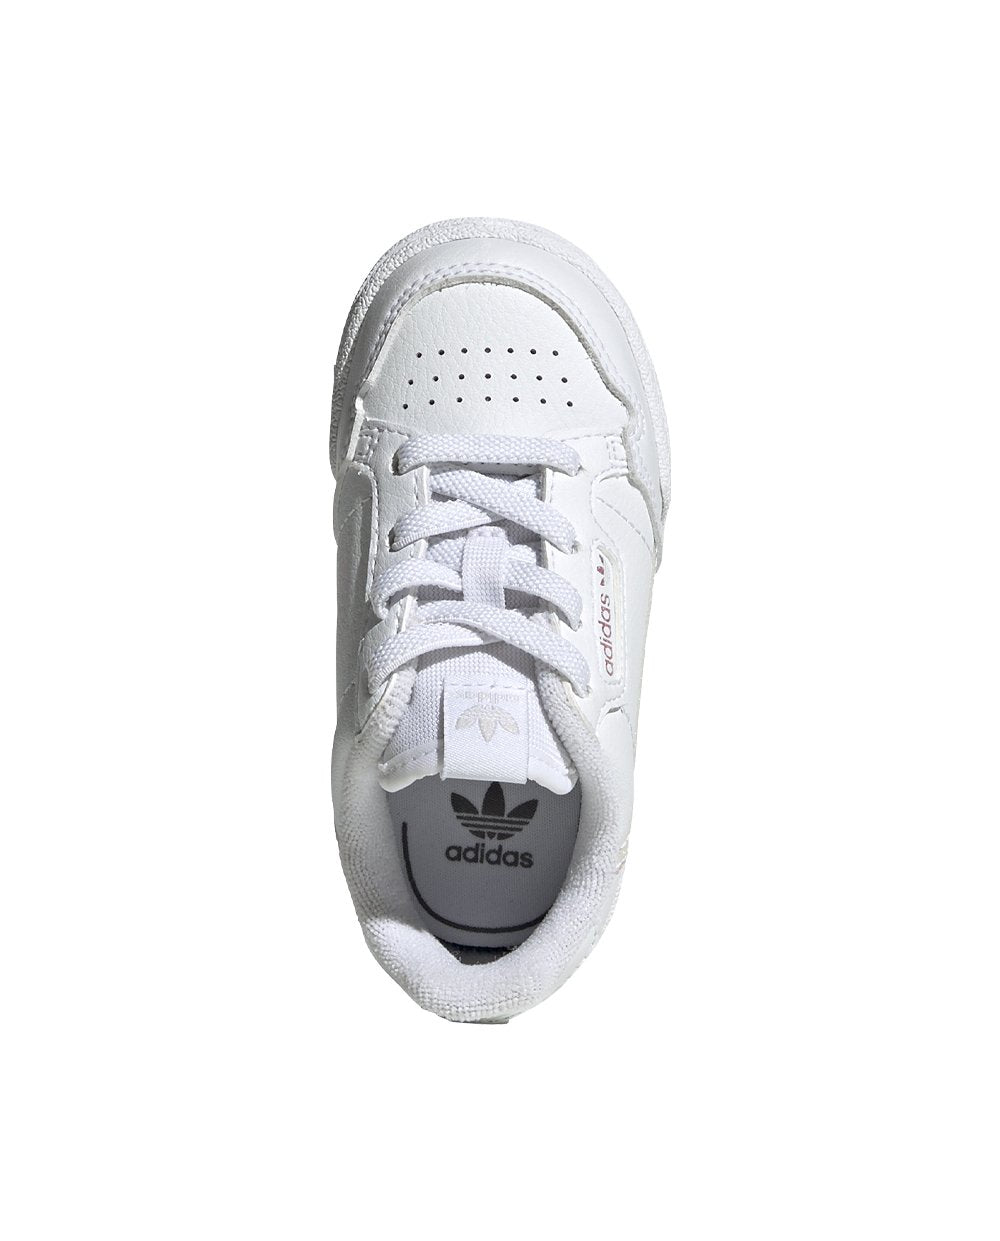 Adidas Continental 80 White with Bright